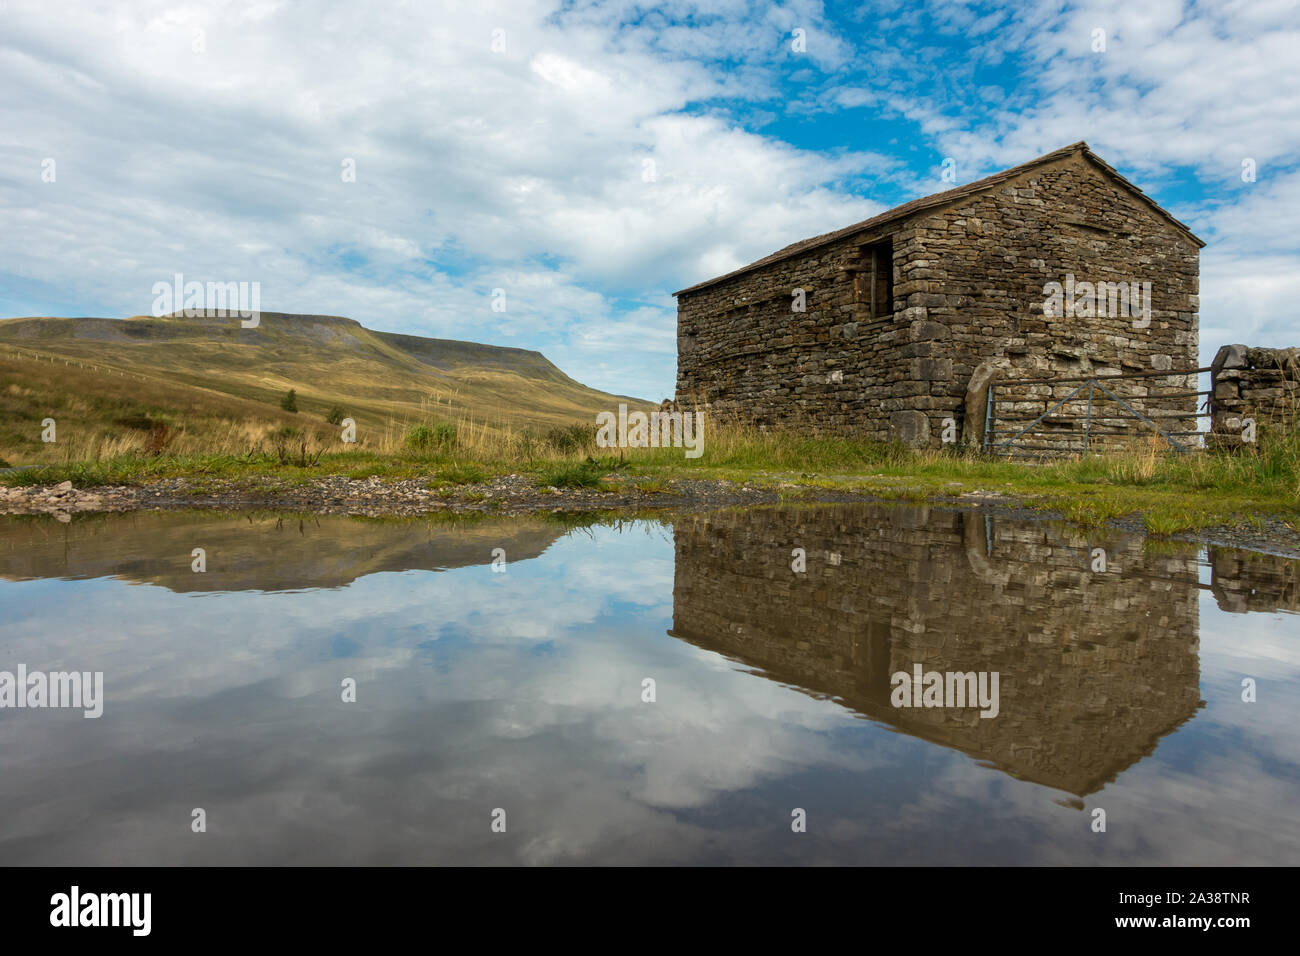 Old Yorkshire stone barn reflected in a puddle with Wild Boar Fell mountain in the background, Mallerstang Dale, Yorkshire Dales National Park, UK lan Stock Photo